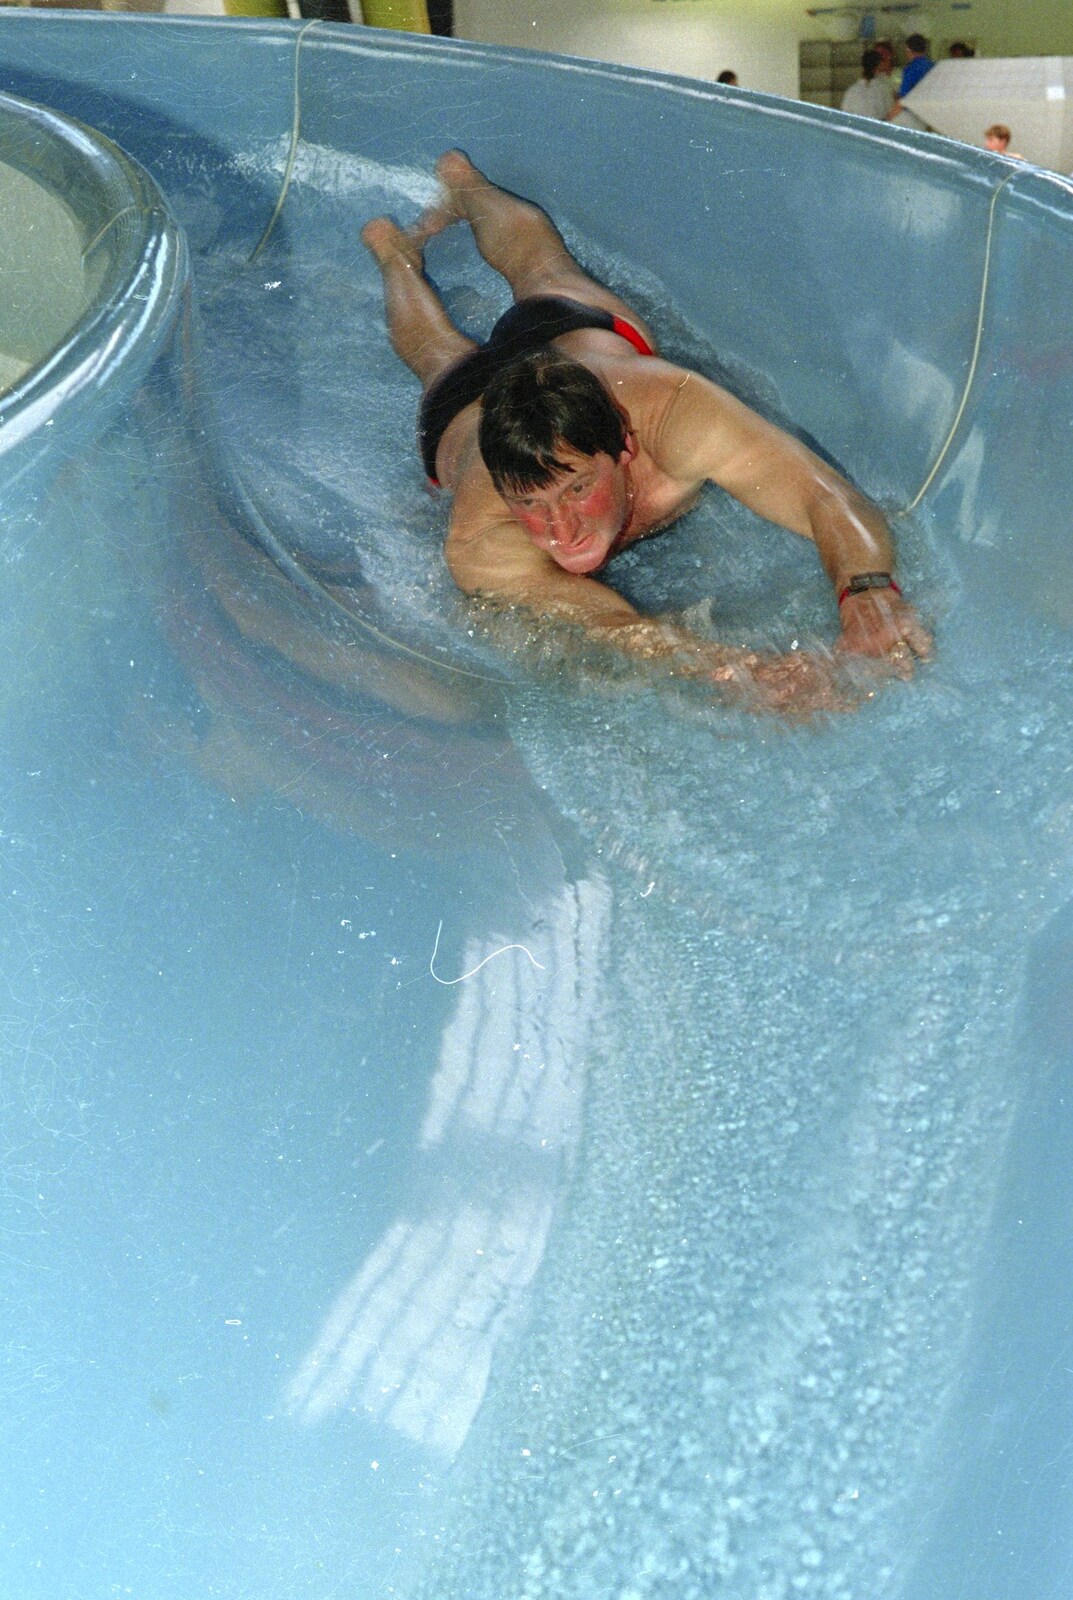 A Trip to Center Parcs, Eemhof, Netherlands - 24th March 1992: Geoff comes hurtling down a water slide